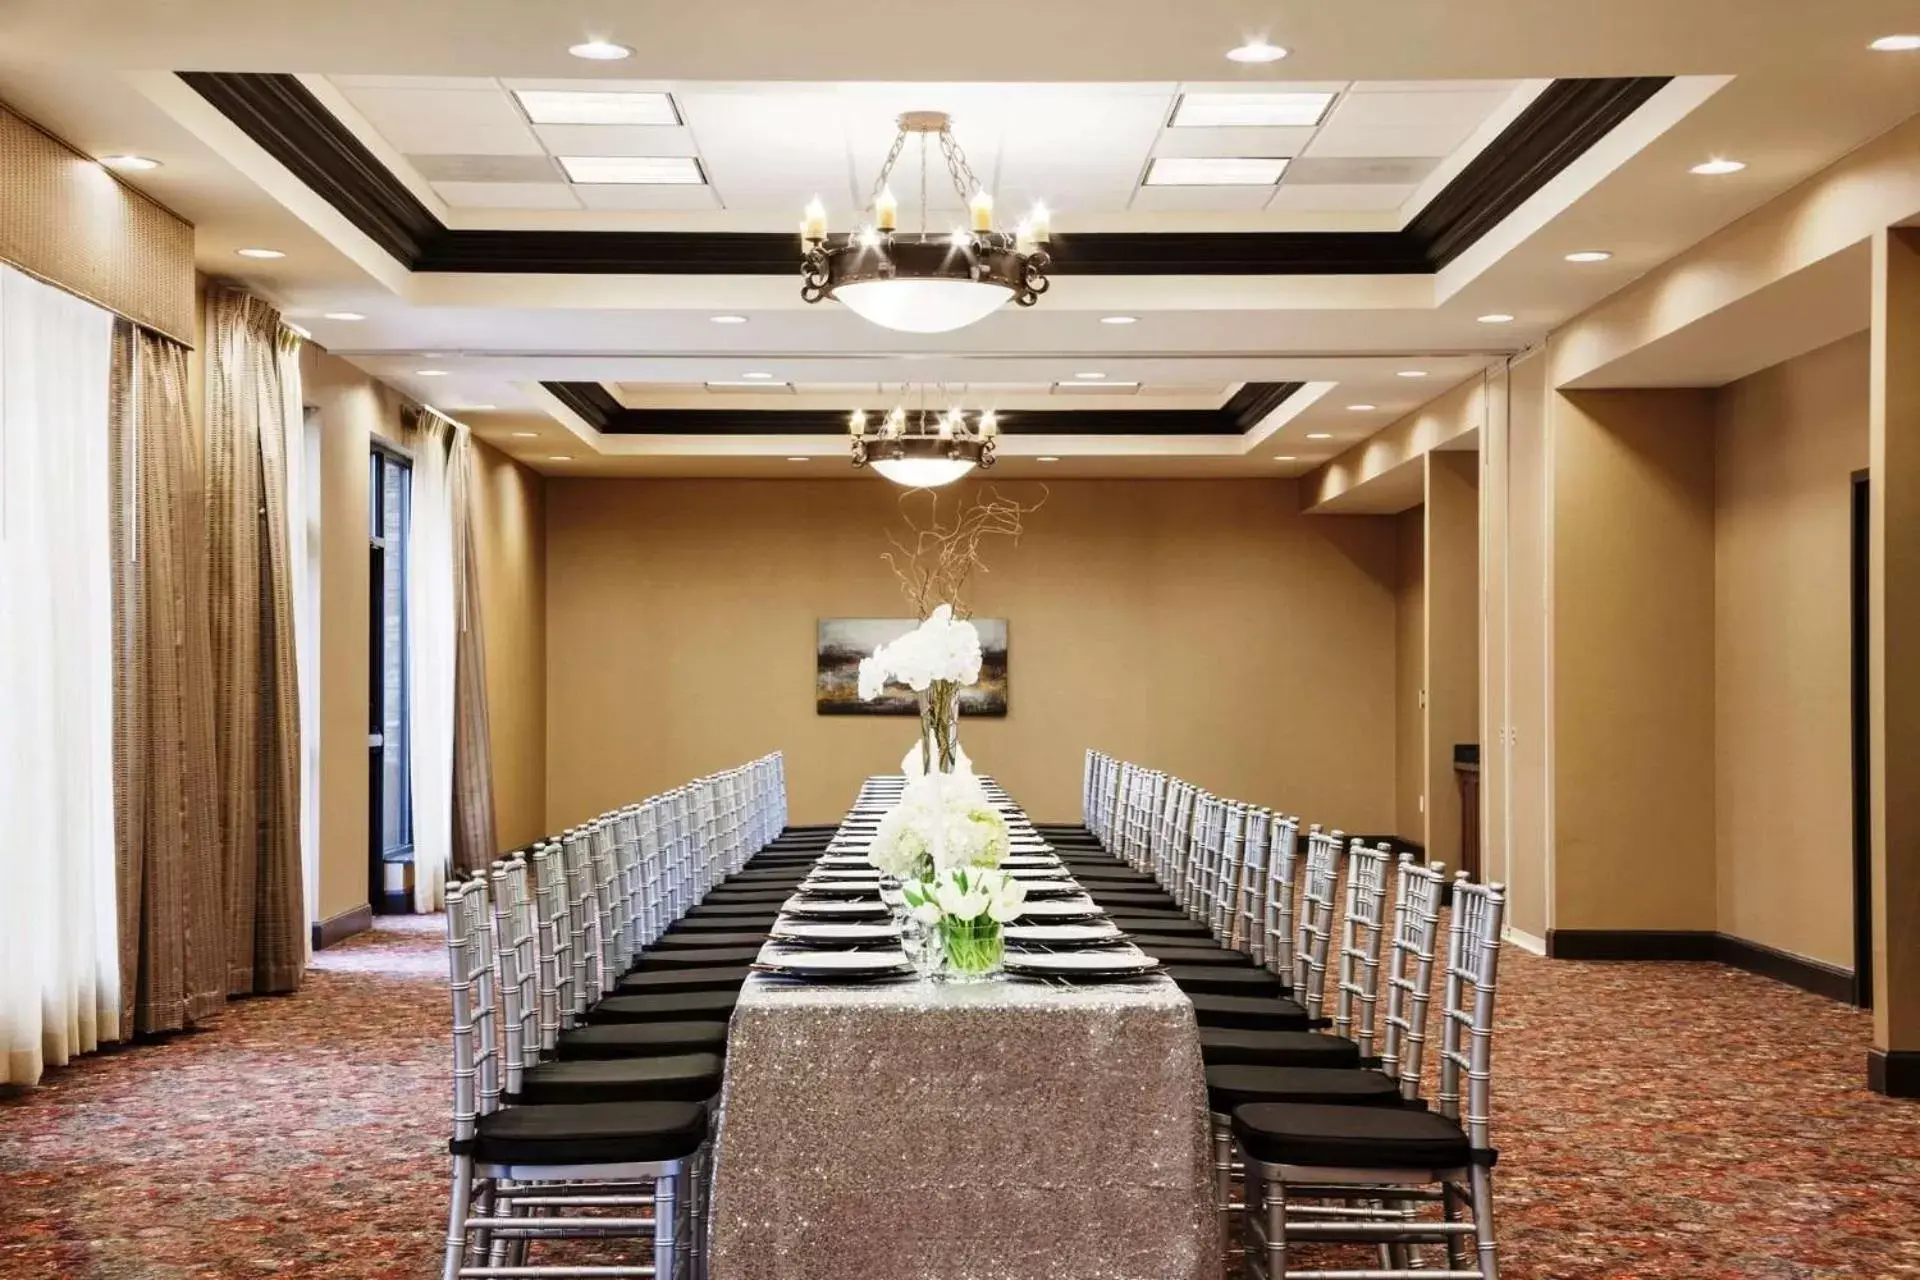 Meeting/conference room, Banquet Facilities in Hilton Garden Inn Denison/Sherman/At Texoma Event Center